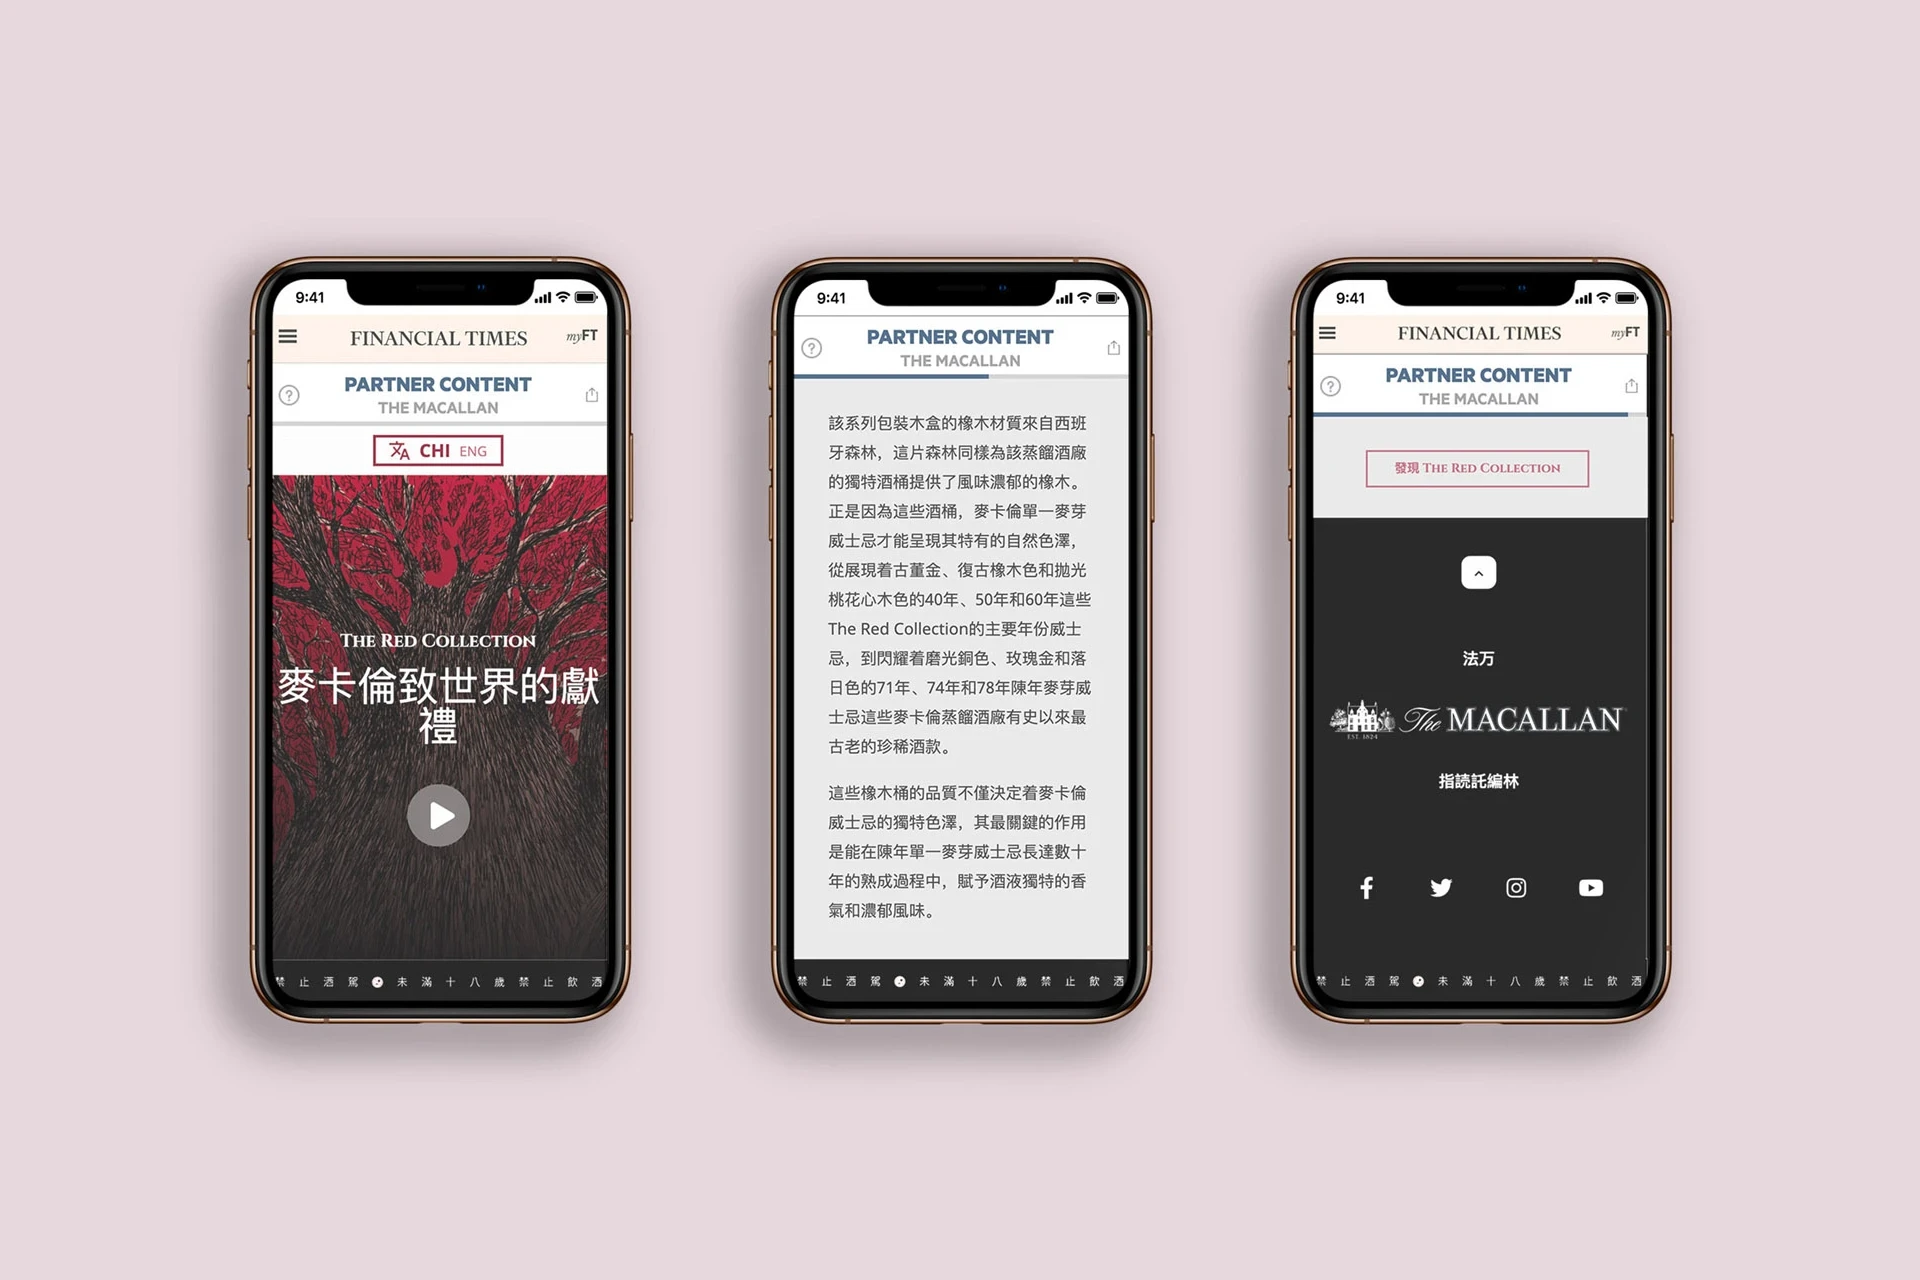 The Macallan's Chinese version of the Homepage on Mobile